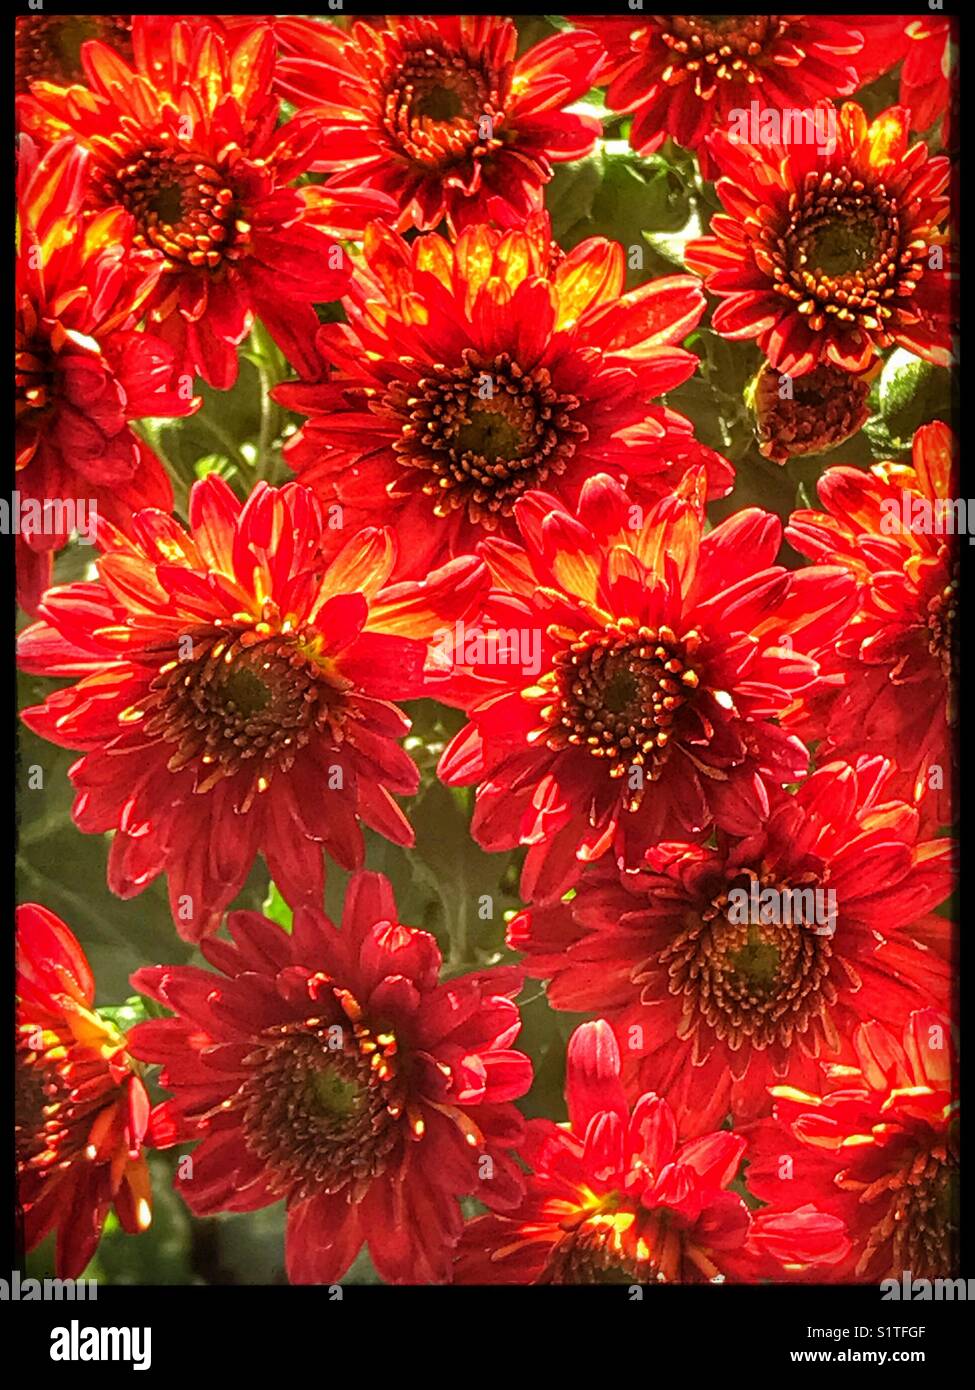 Vibrant red chrysanthemums flowers backlit in bright sunlight Stock Photo